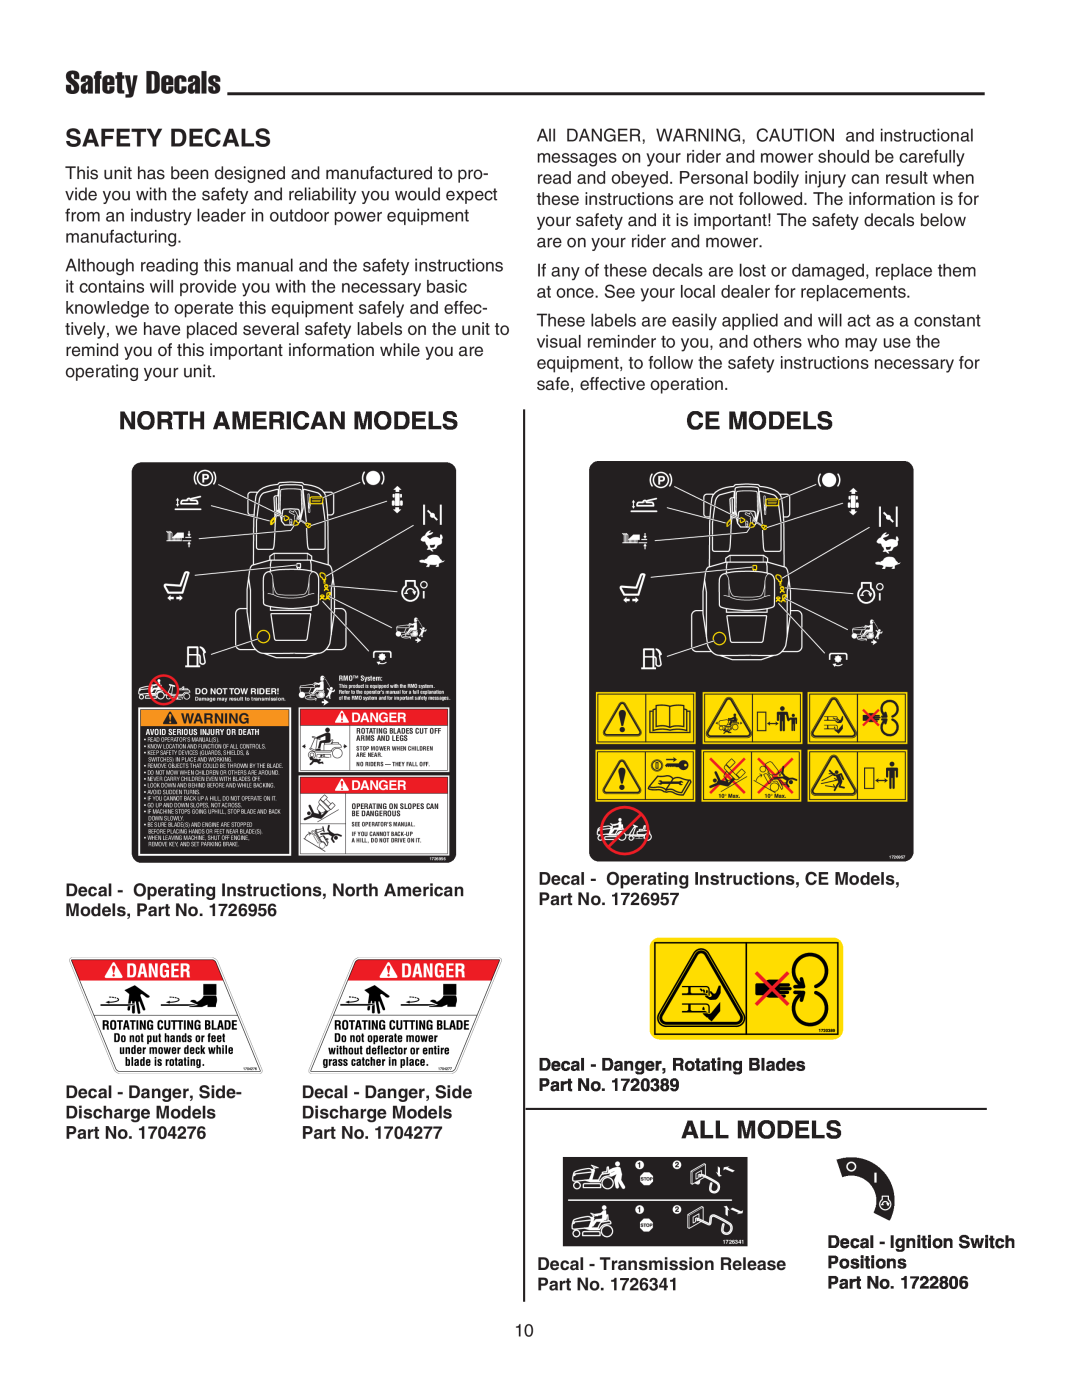 Snapper RE 200 manual Safety Decals, North American Models, Ce Models, All Models 